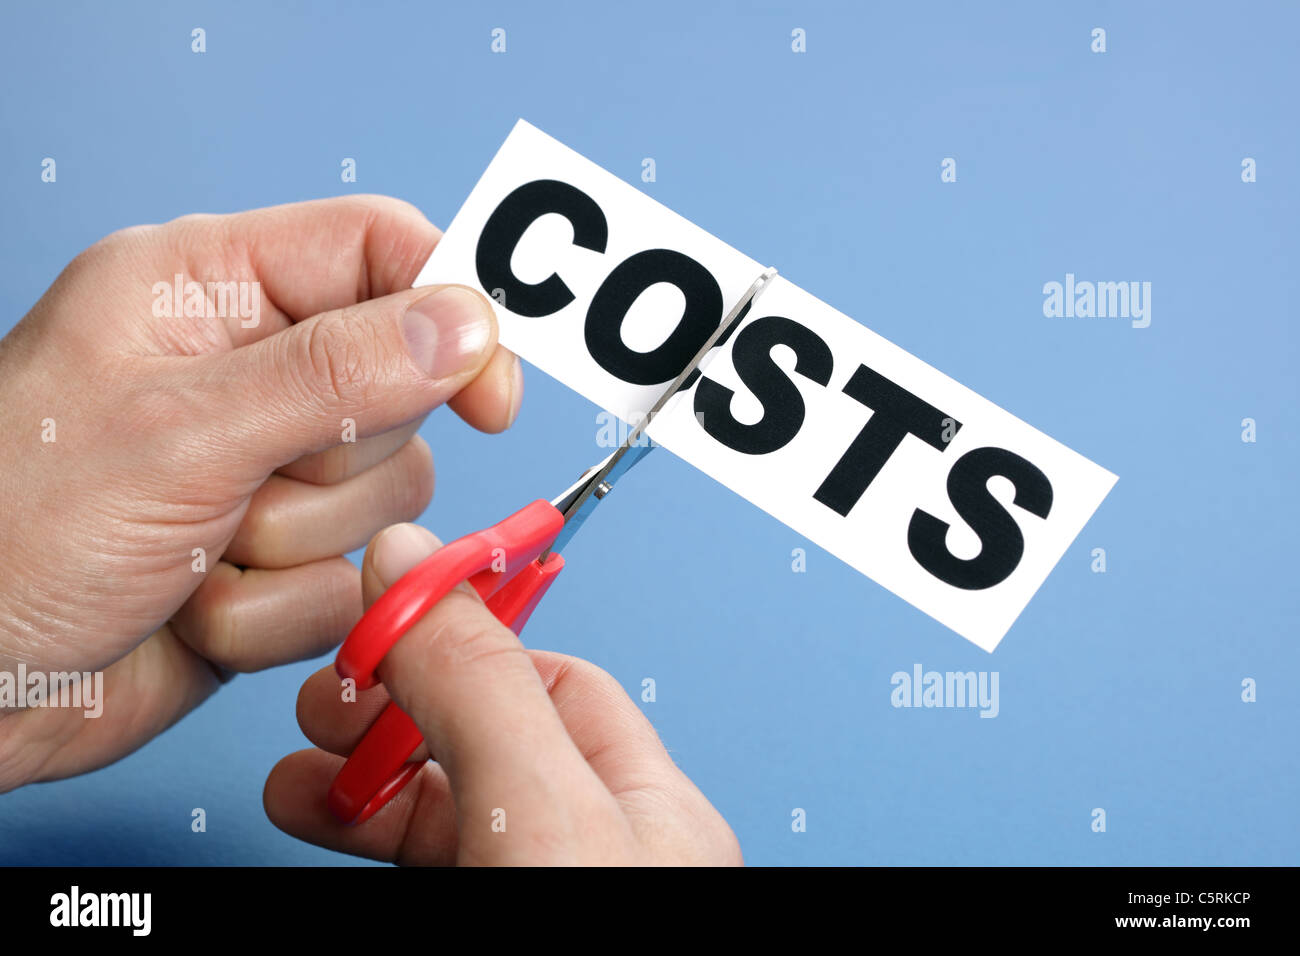 Cutting costs Stock Photo